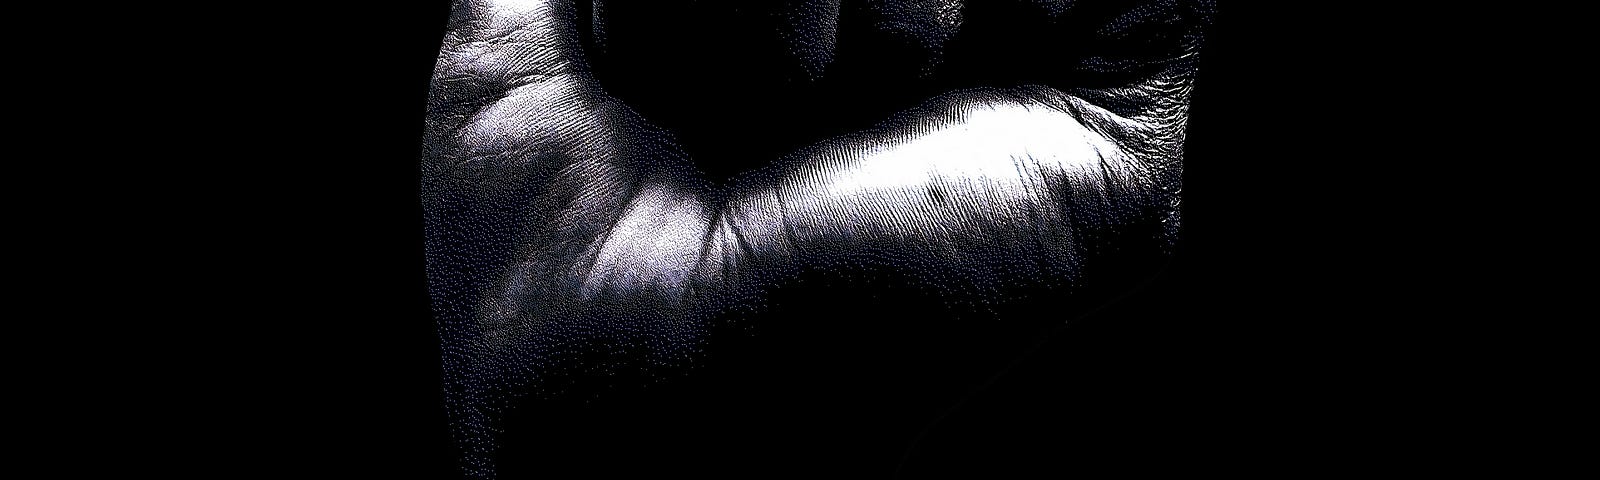 PICTURE OF A CLENCHED FIST